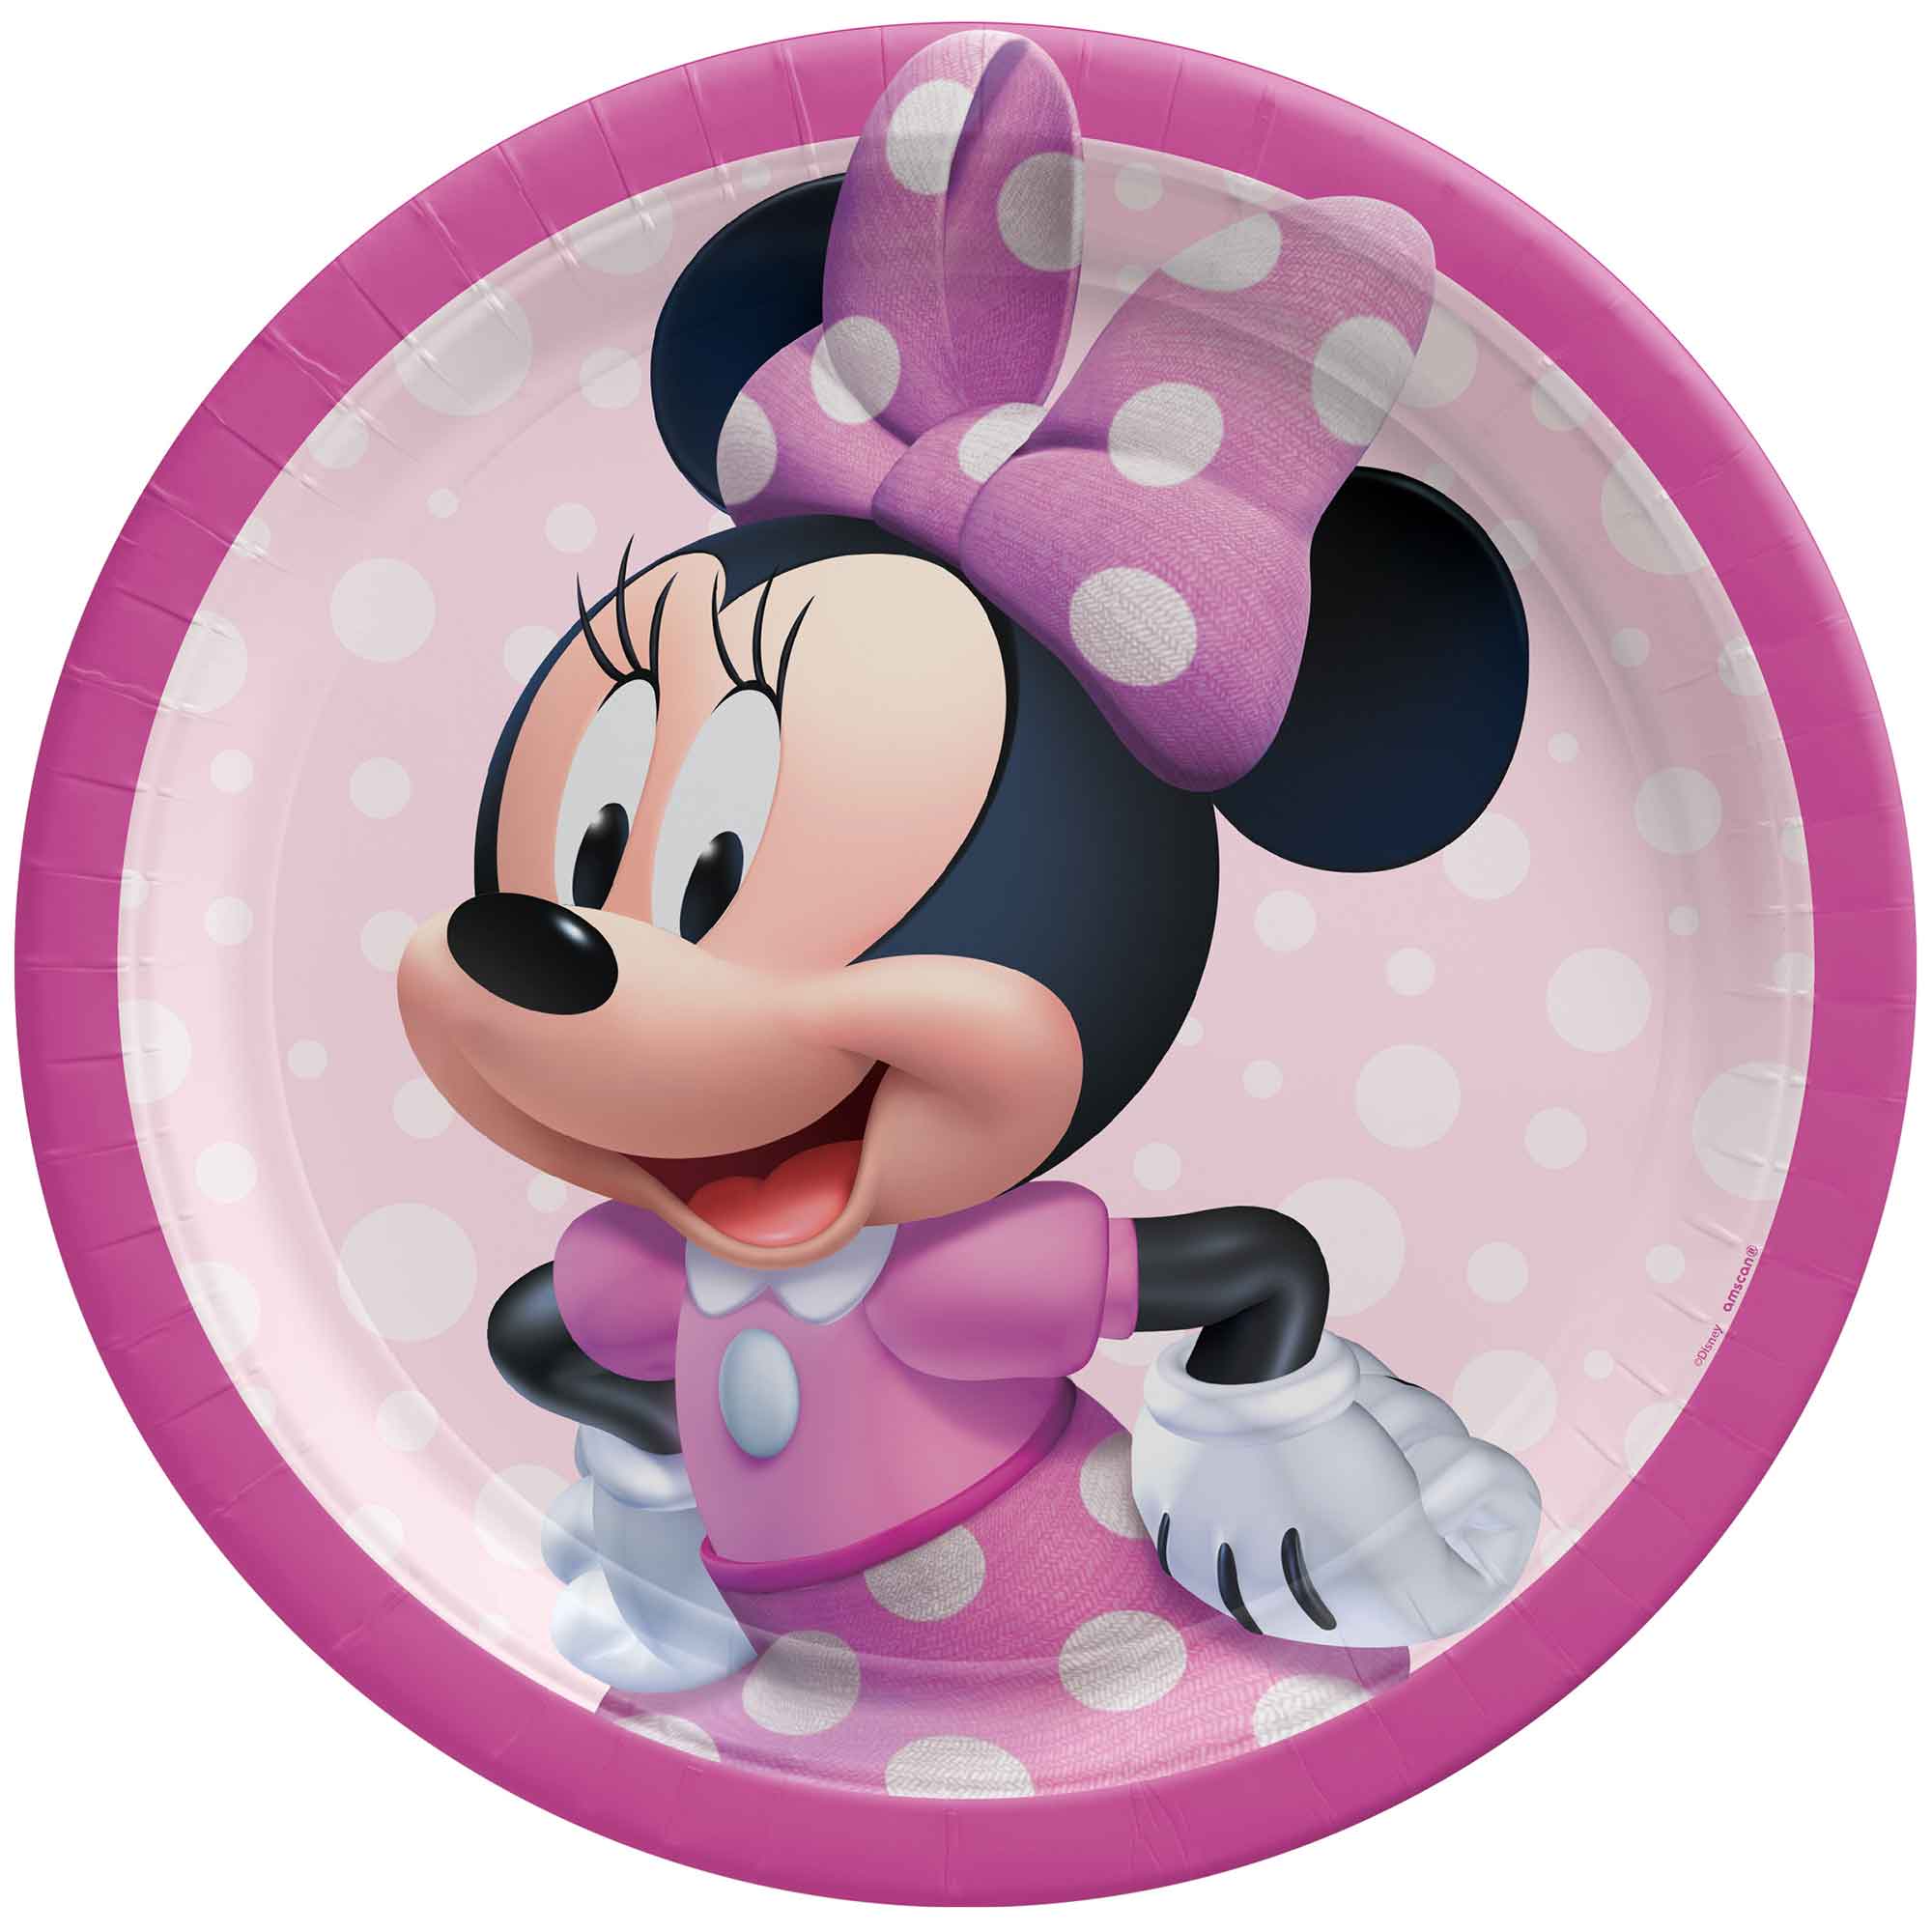 Mickey Mouse Forever 9" / 23cm Paper Plates Pk/8